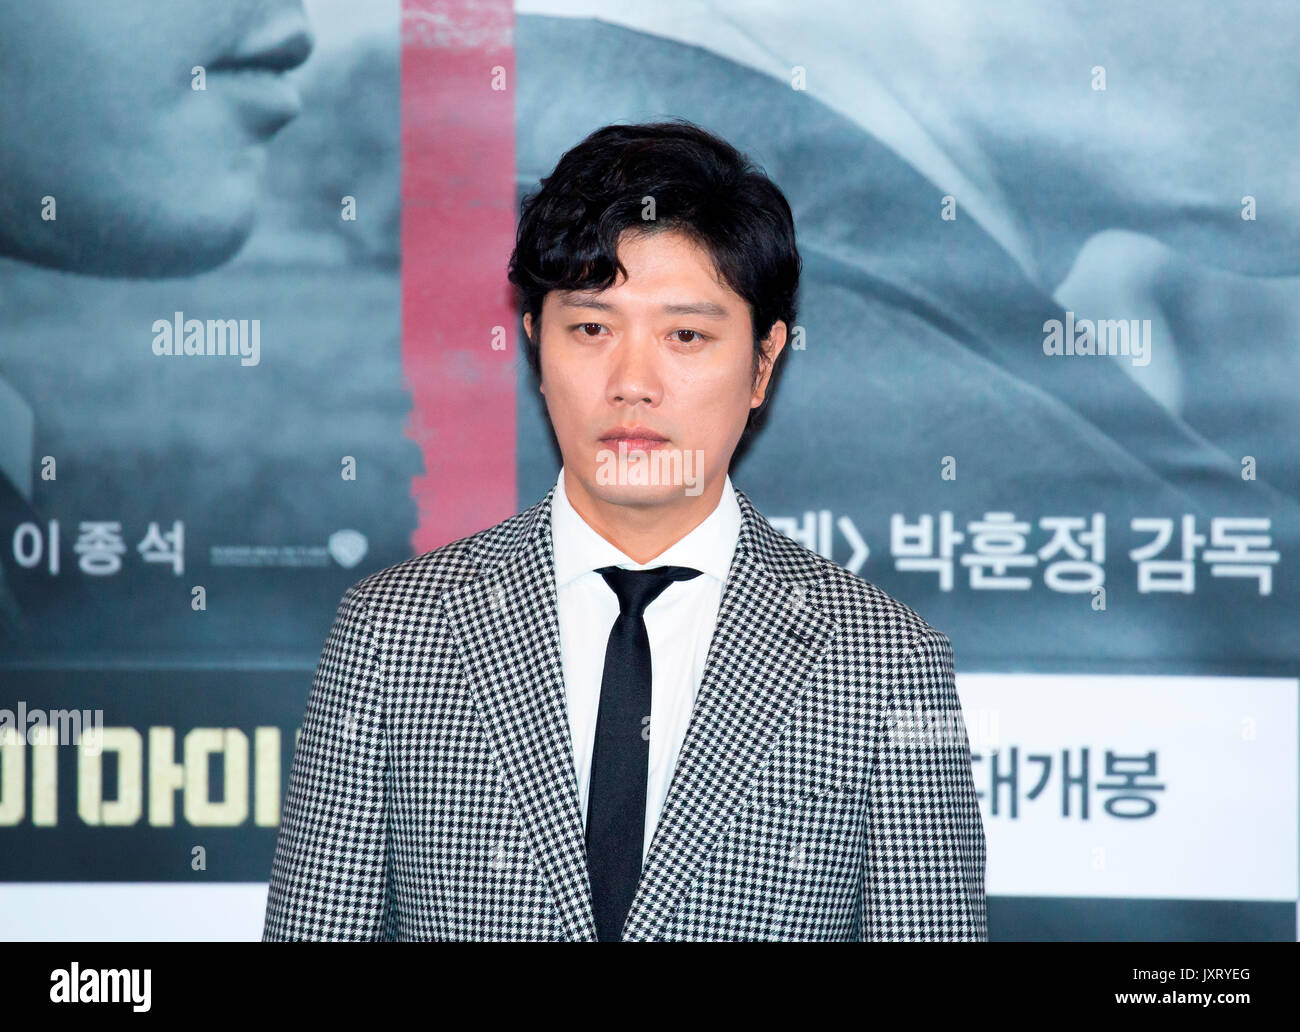 Park Hee-soon, Aug 16, 2017 : South Korean actor Park Hee-soon attends a press preview of his new movie, V.I.P. in Seoul, South Korea. Credit: Lee Jae-Won/AFLO/Alamy Live News Stock Photo